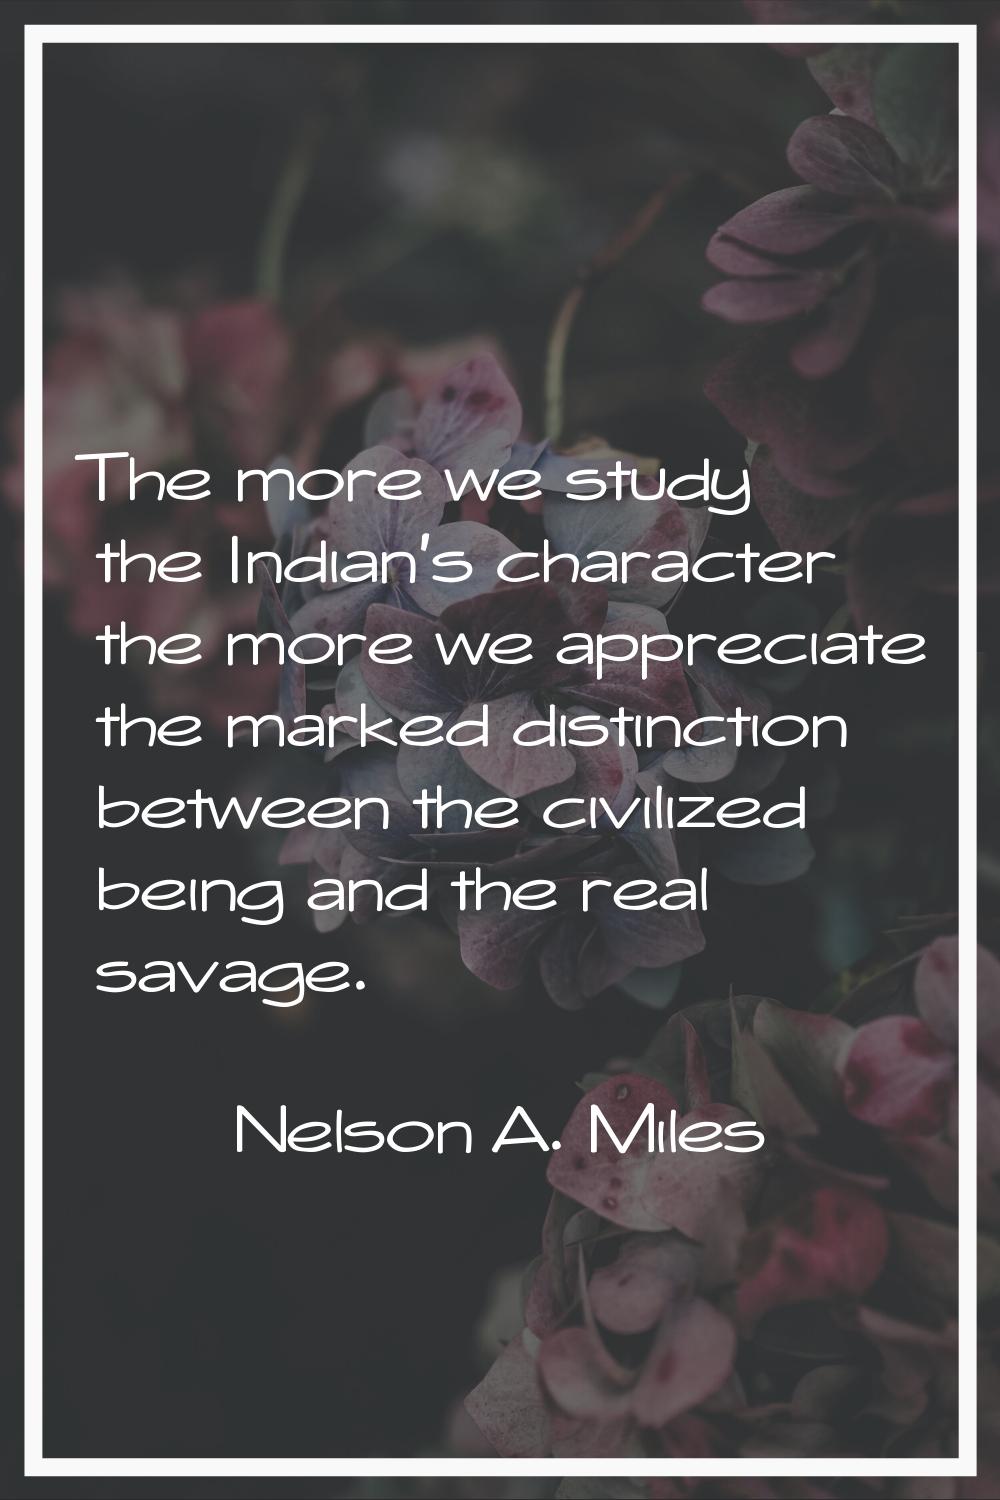 The more we study the Indian's character the more we appreciate the marked distinction between the 